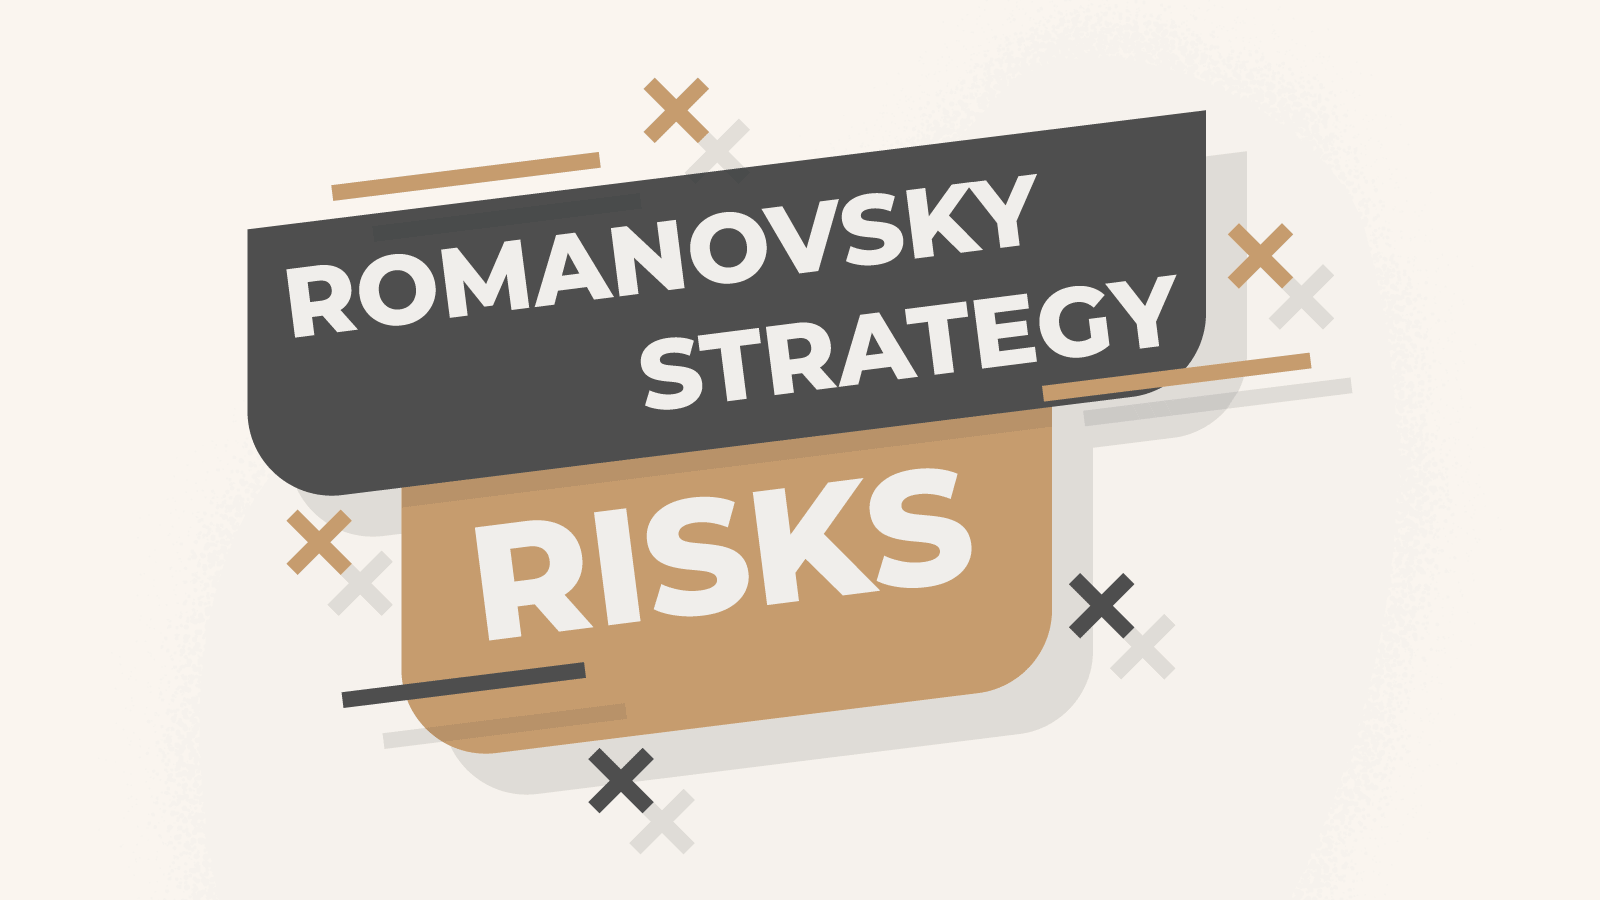 Does the Romanosky betting system have risks